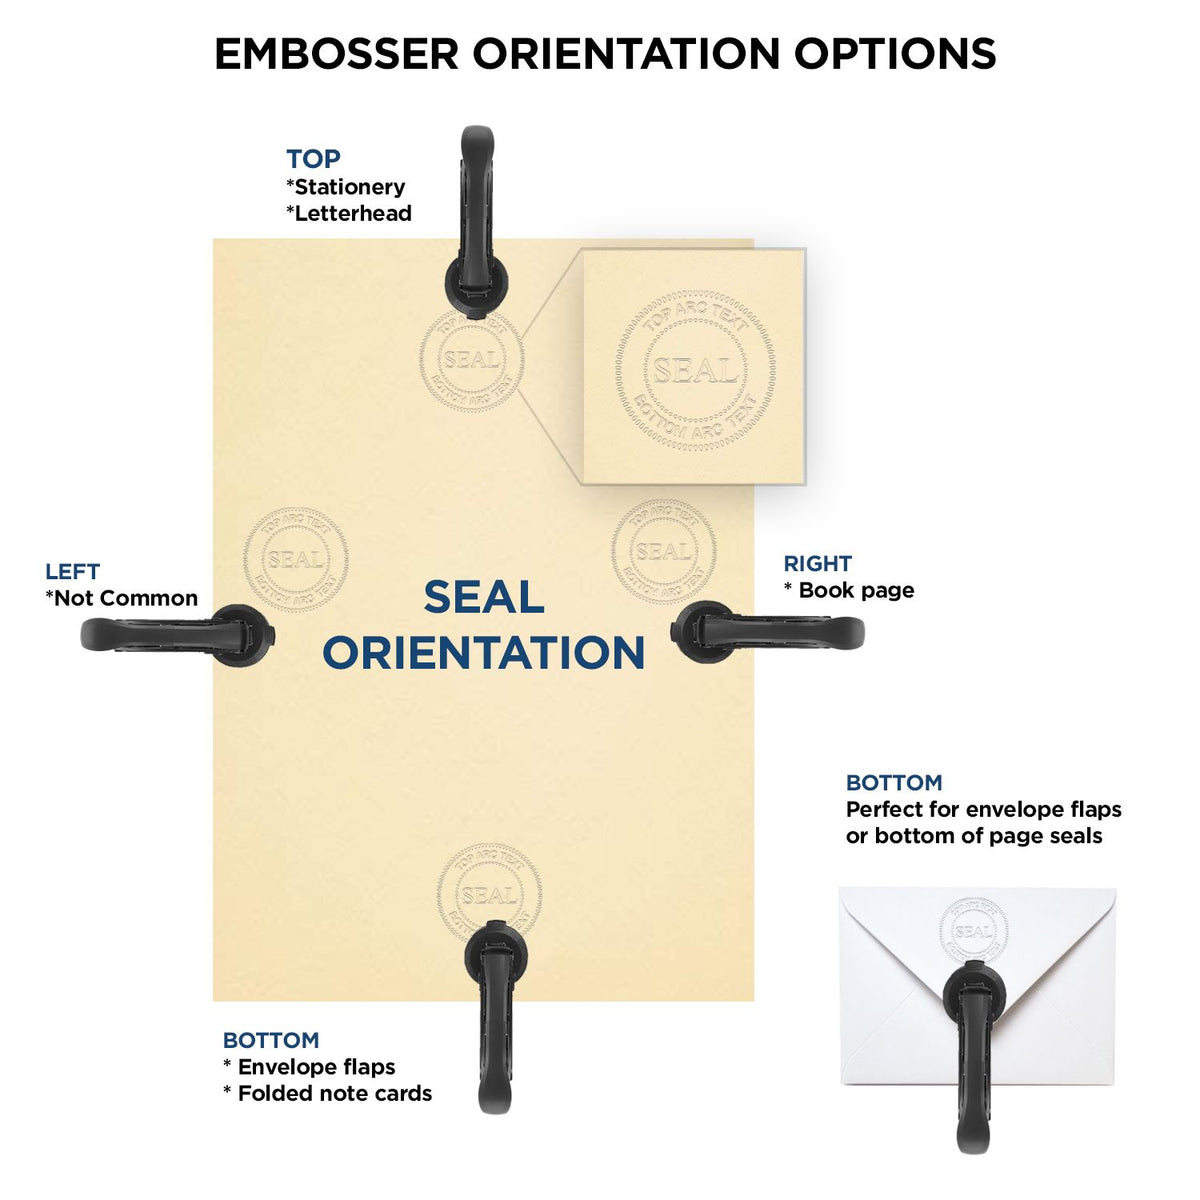 An infographic for the Hybrid Illinois Architect Seal showing embosser orientation, this is showing examples of a top, bottom, right and left insert.